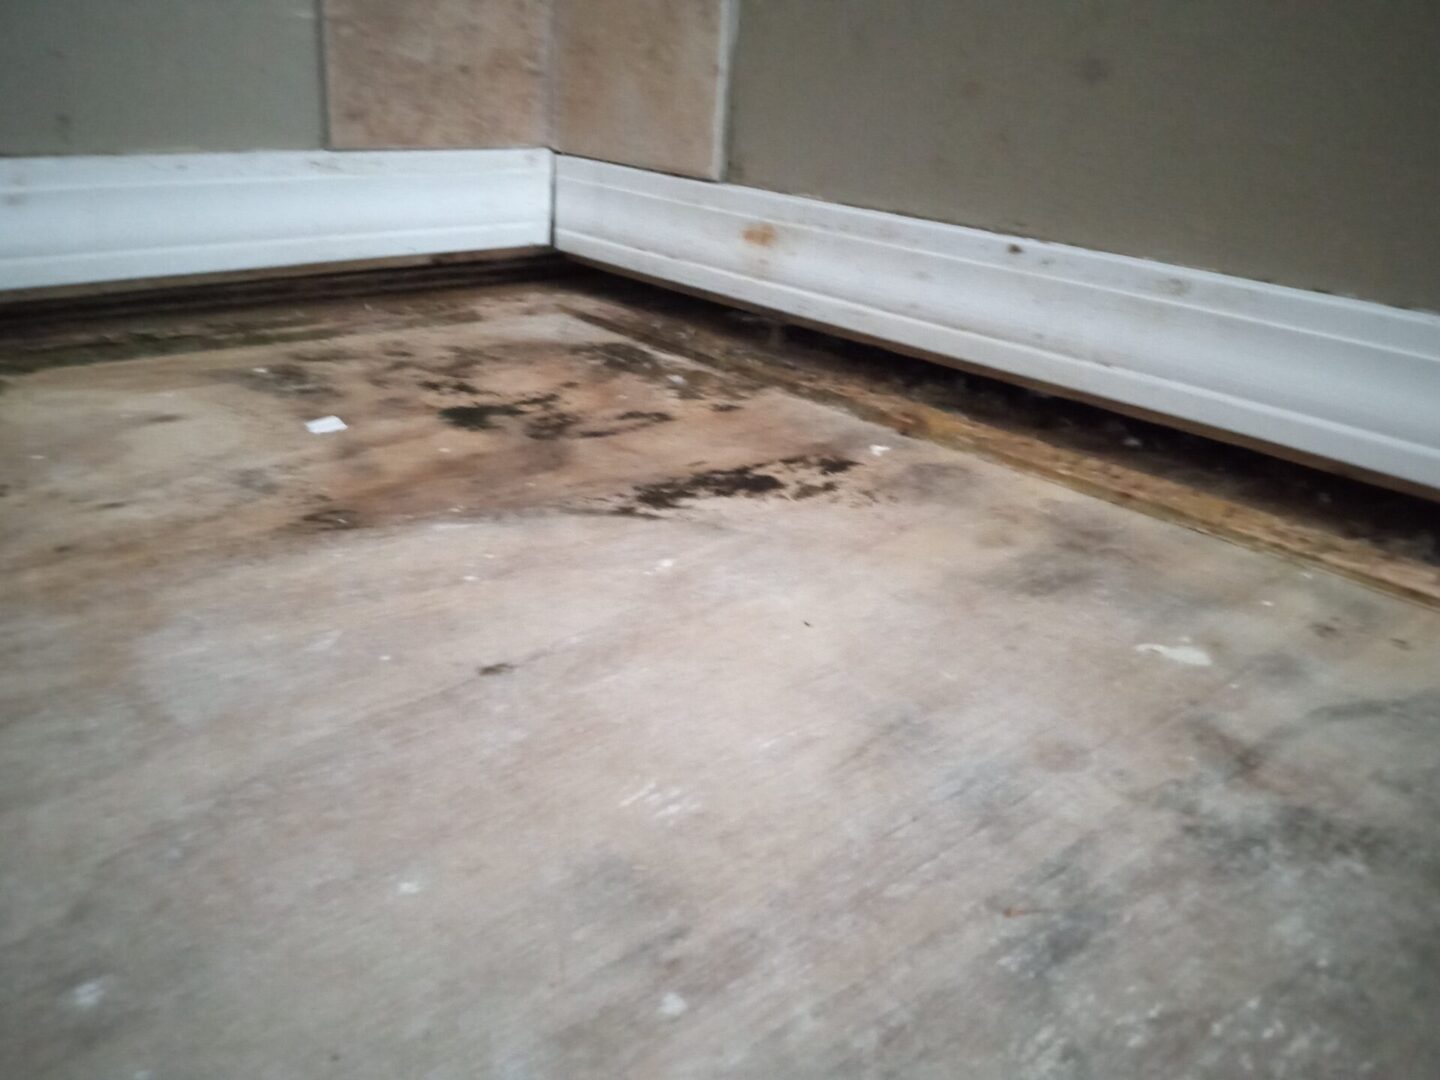 A dirty floor with brown stains and white baseboards.